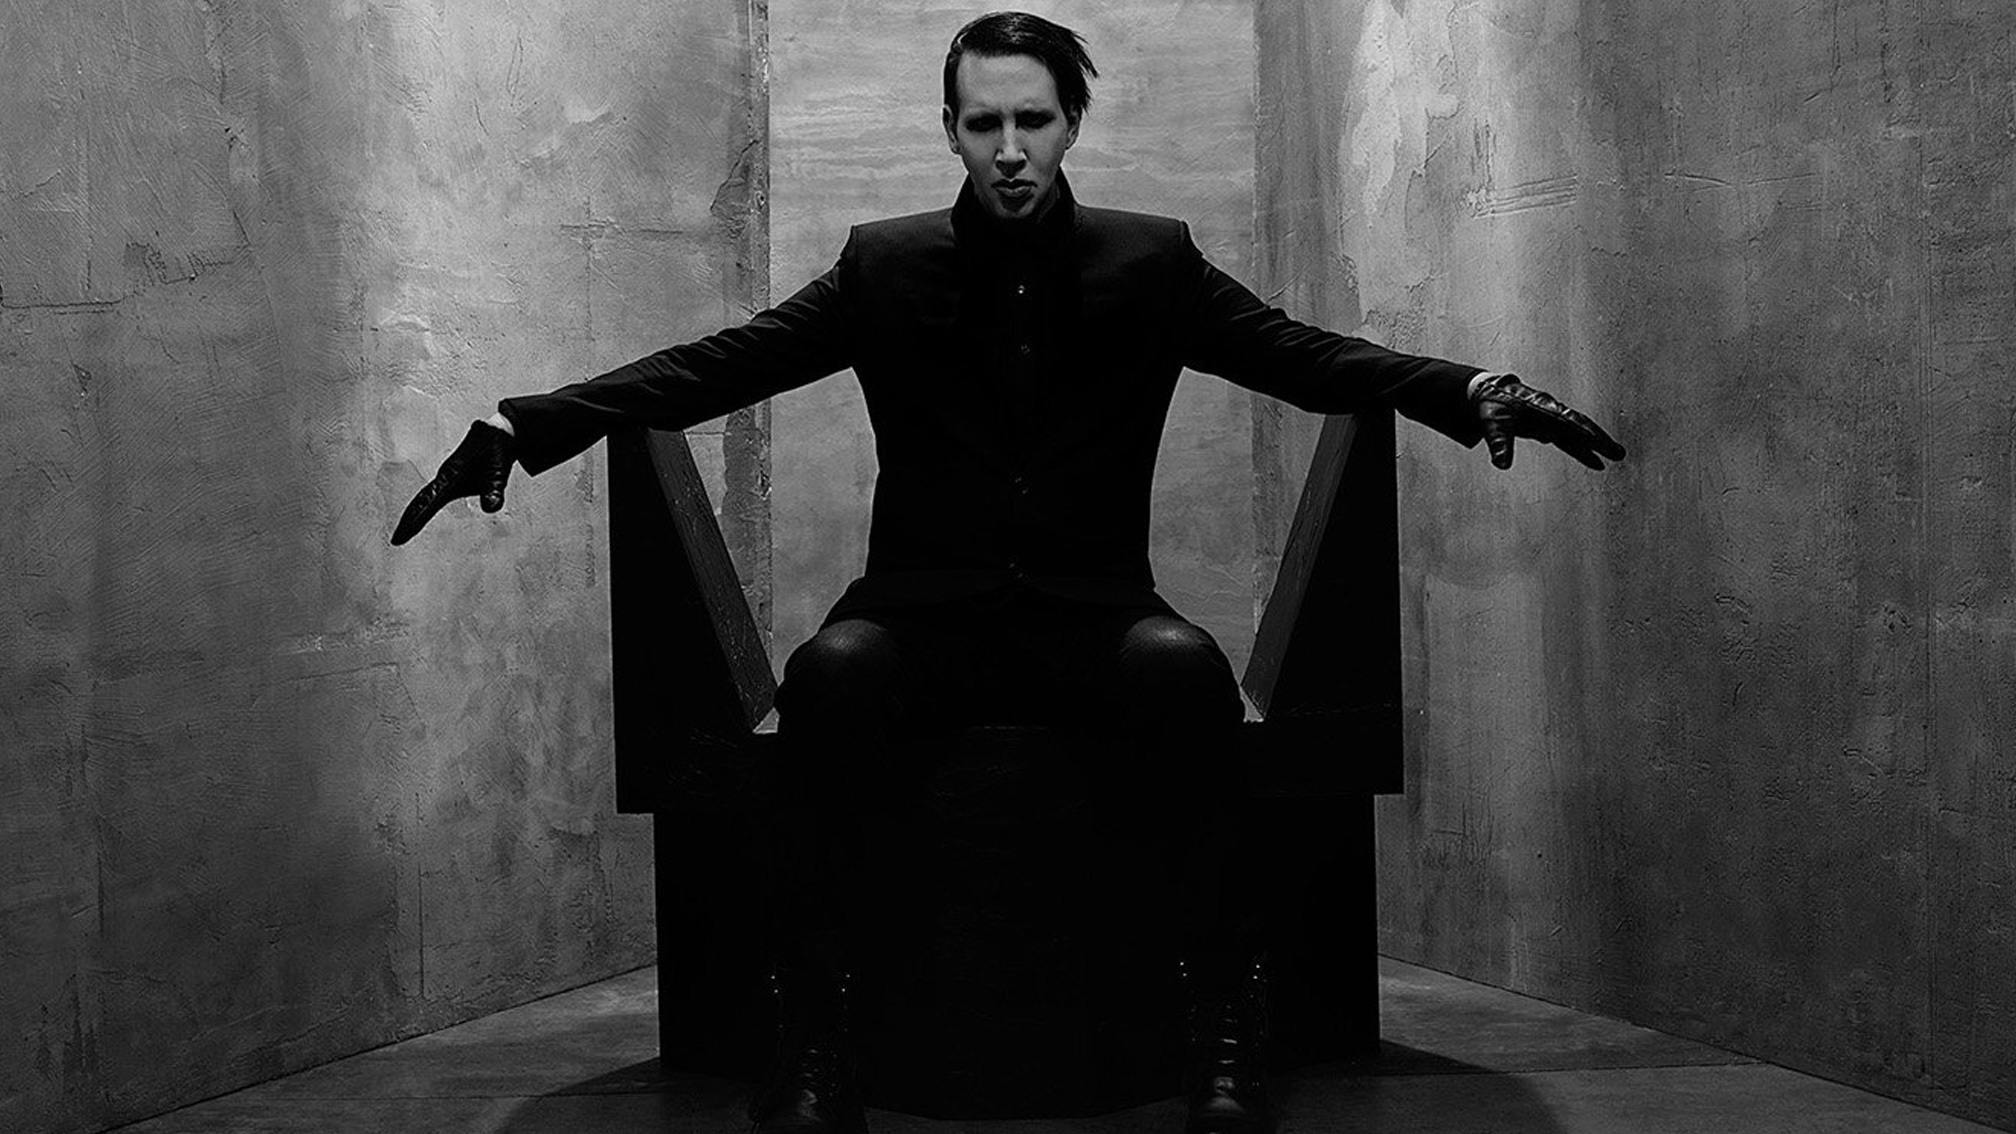 GRAMMY boss comments on Marilyn Manson's 2022 nominations for Kanye West collabs